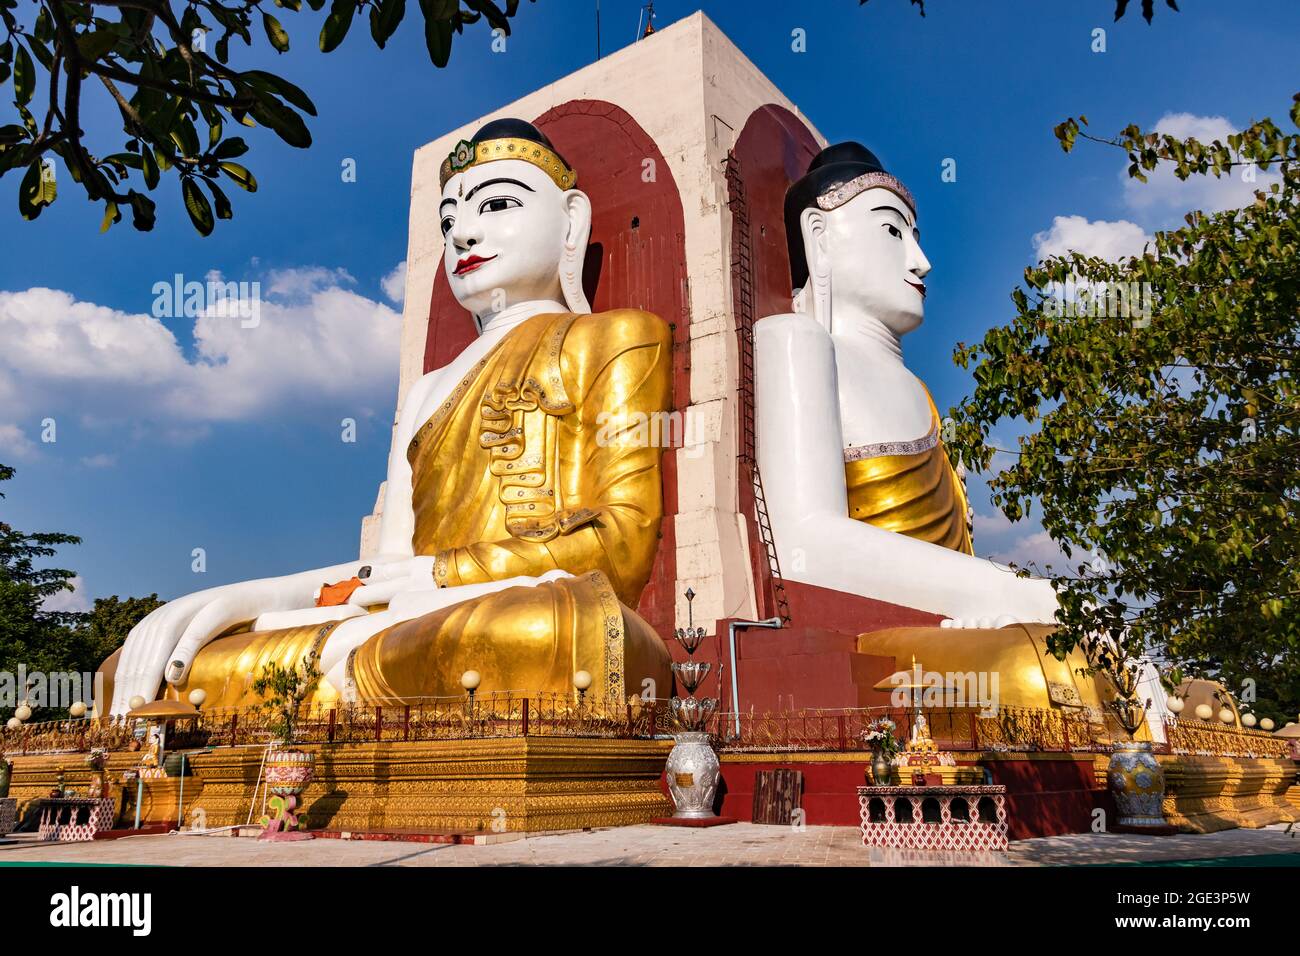 The four seated Buddhas of Kyaikpu in Bago in distant Myanmar Stock Photo